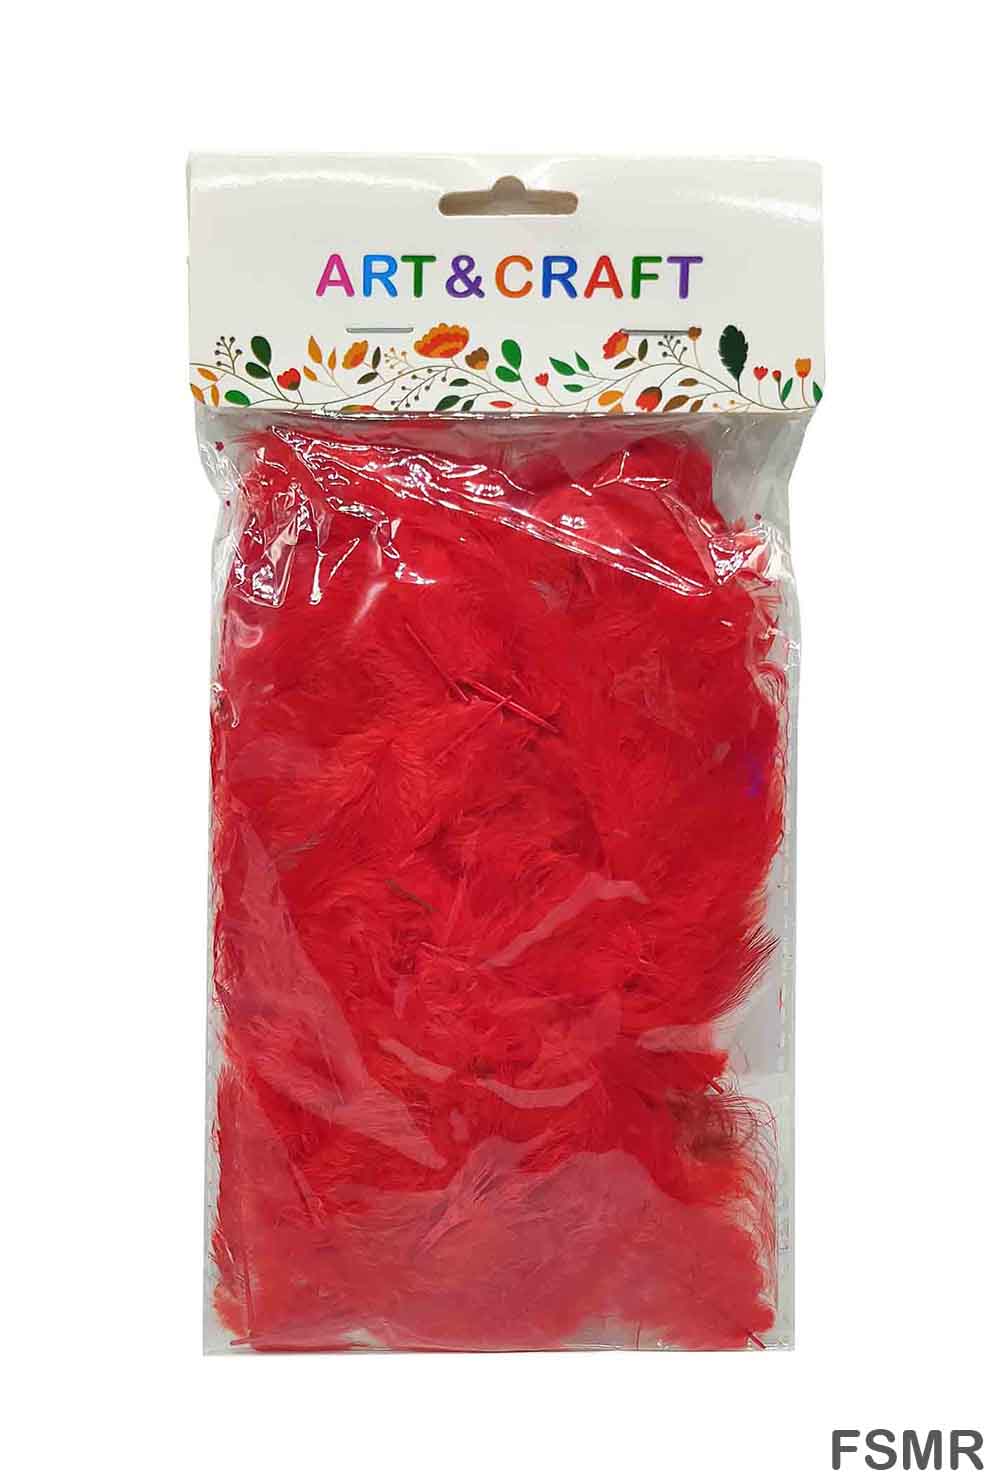 MG Traders Pack Feather Feather Soft Mini Red (Fsmr)  (Contain 1 Unit)